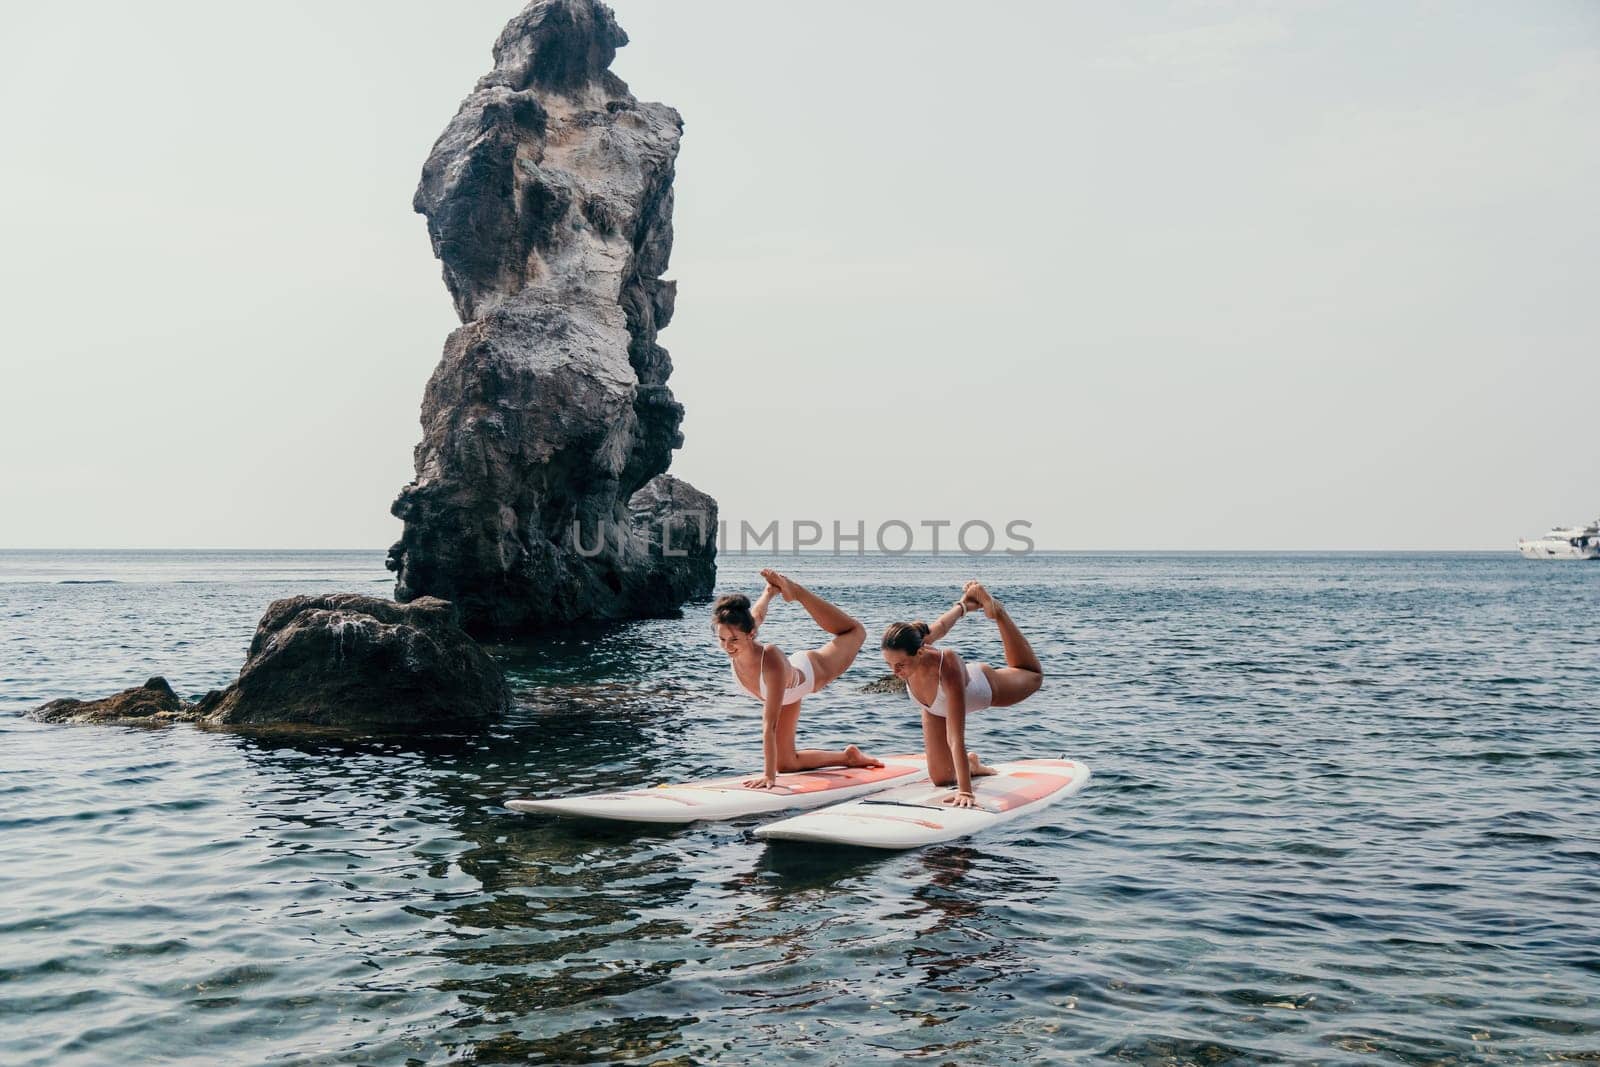 Woman sup yoga. Middle age sporty woman practising yoga pilates on paddle sup surfboard. Female stretching doing workout on sea water. Modern individual hipster outdoor summer sport activity